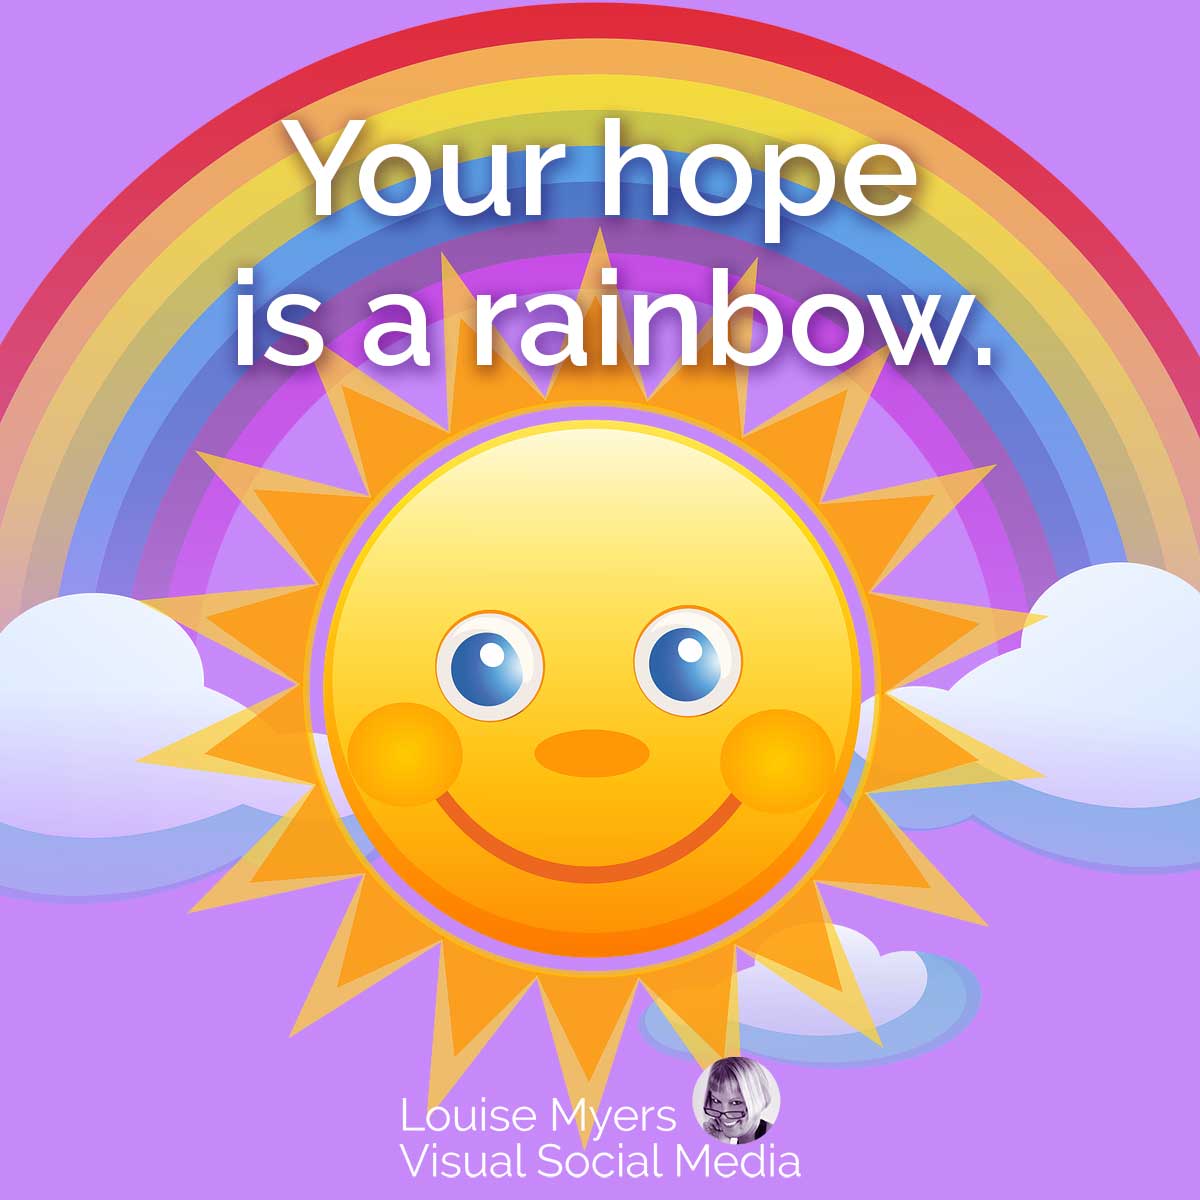 cute drawing of smiling sun with a rainbow says your hope is a rainbow.